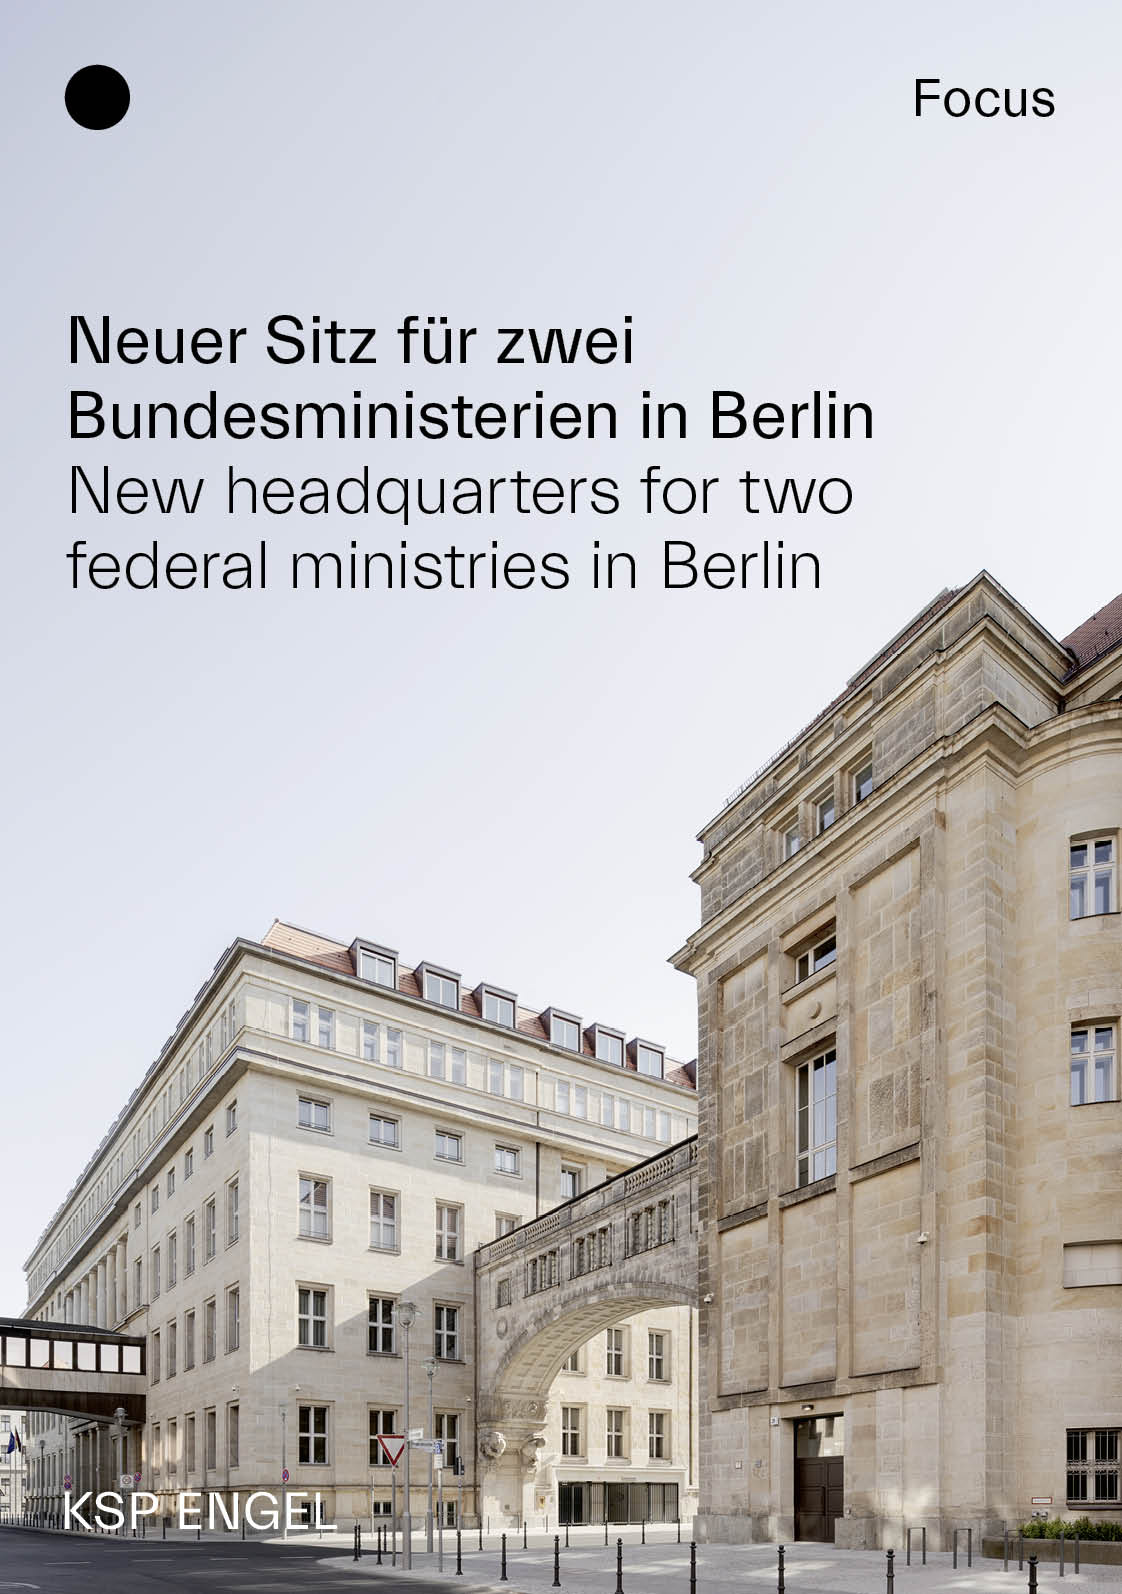 New headquarters for two federal ministries in Berlin